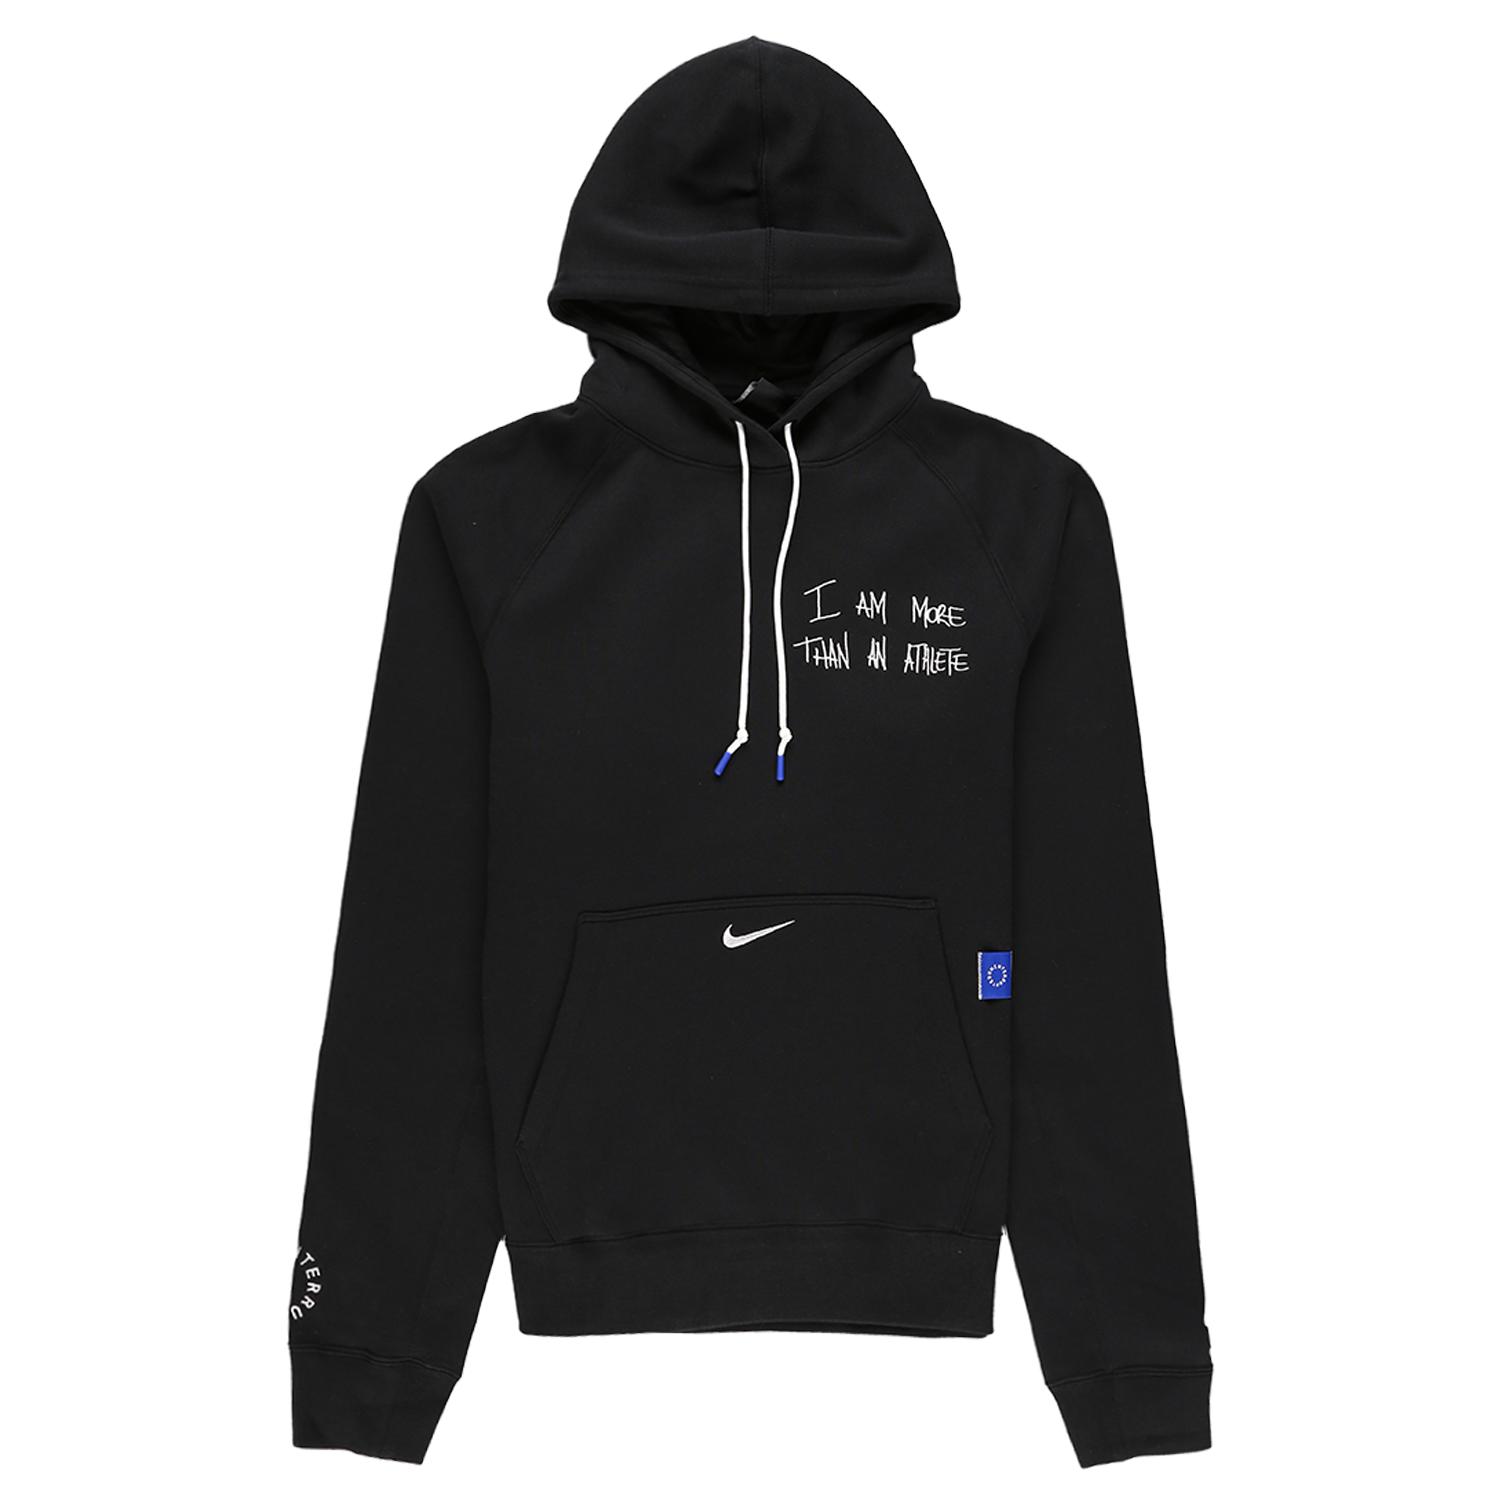 i am more than an athlete hoodie